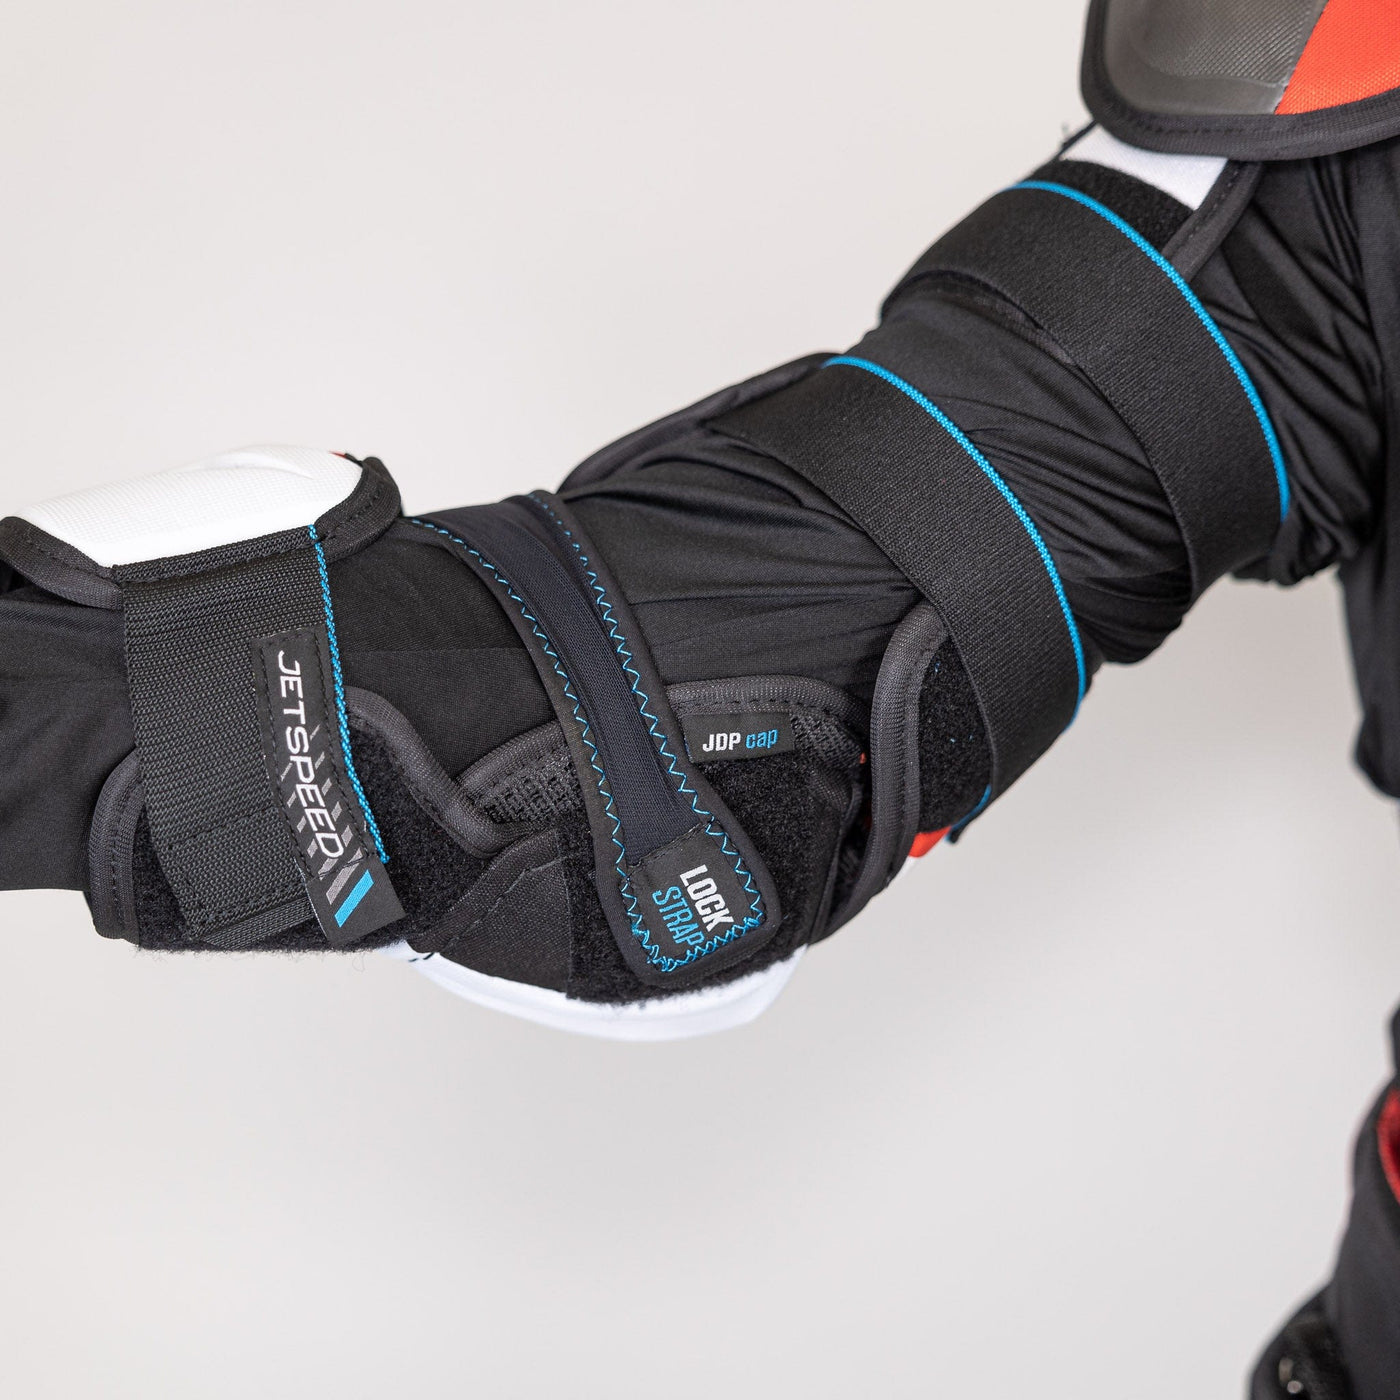 CCM Jetspeed FT6 Senior Hockey Elbow Pads - The Hockey Shop Source For Sports